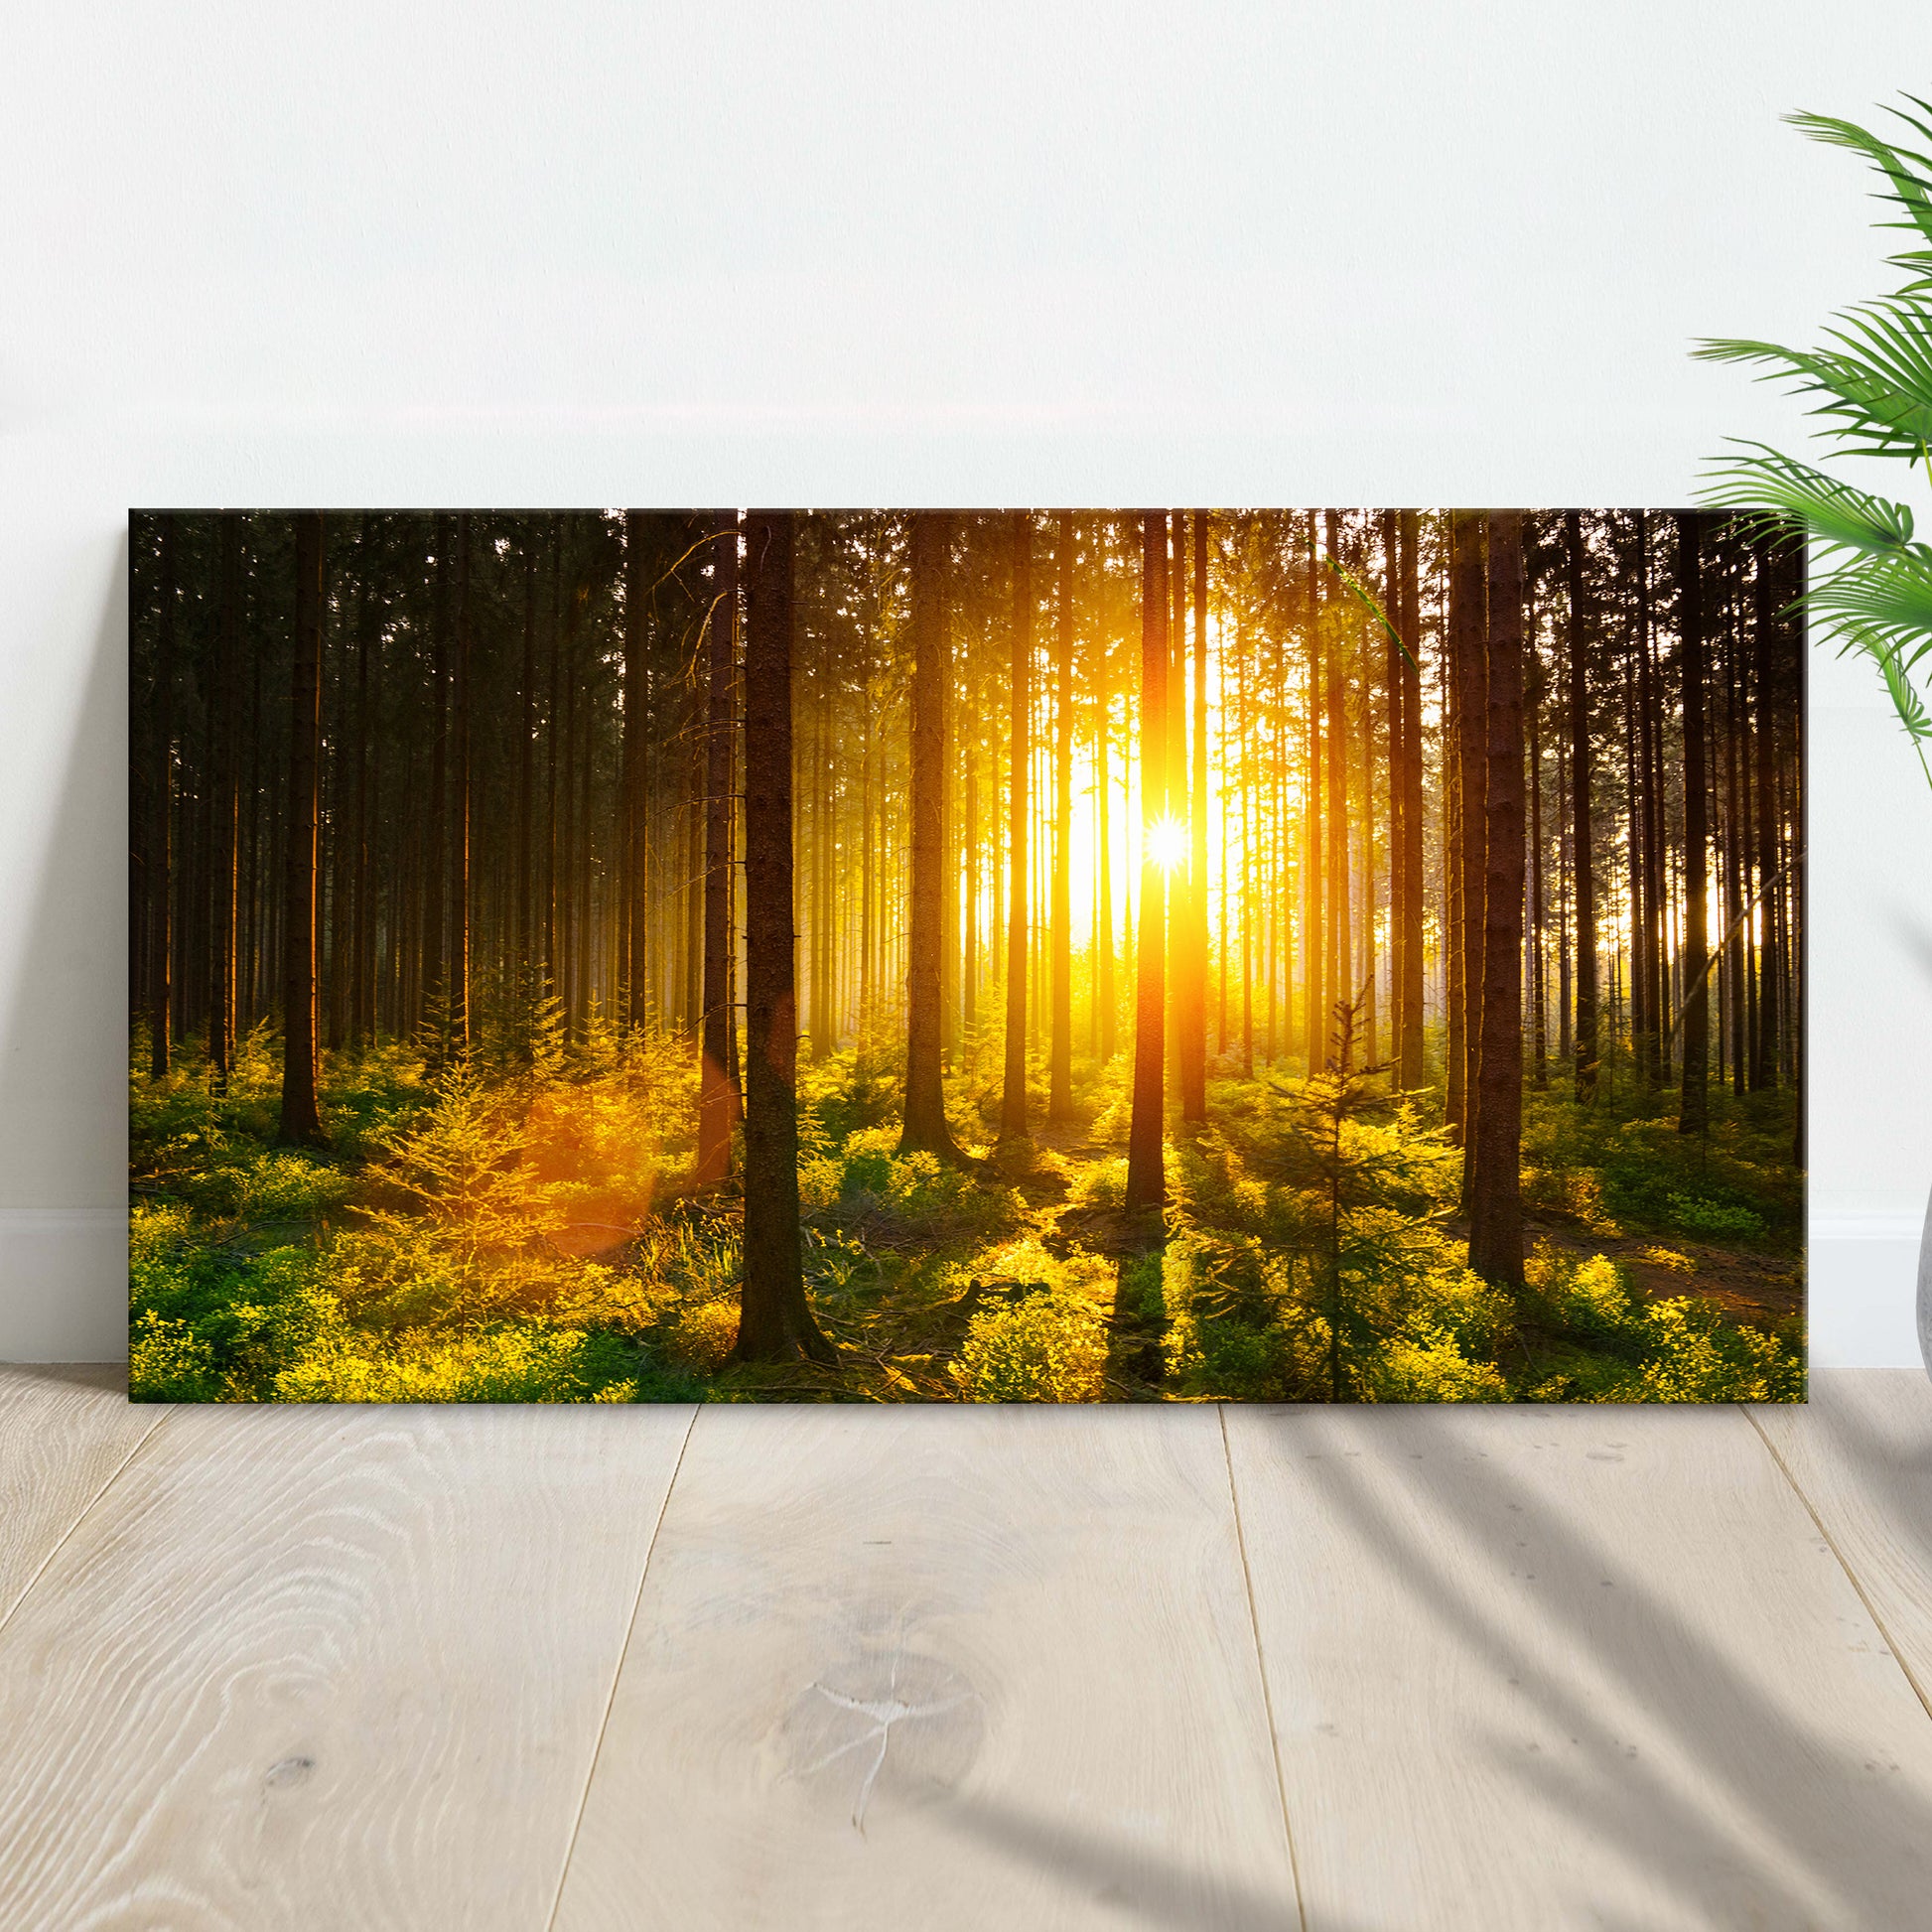 Silent Woods At Sunrise Canvas Wall Art - Image by Tailored Canvases